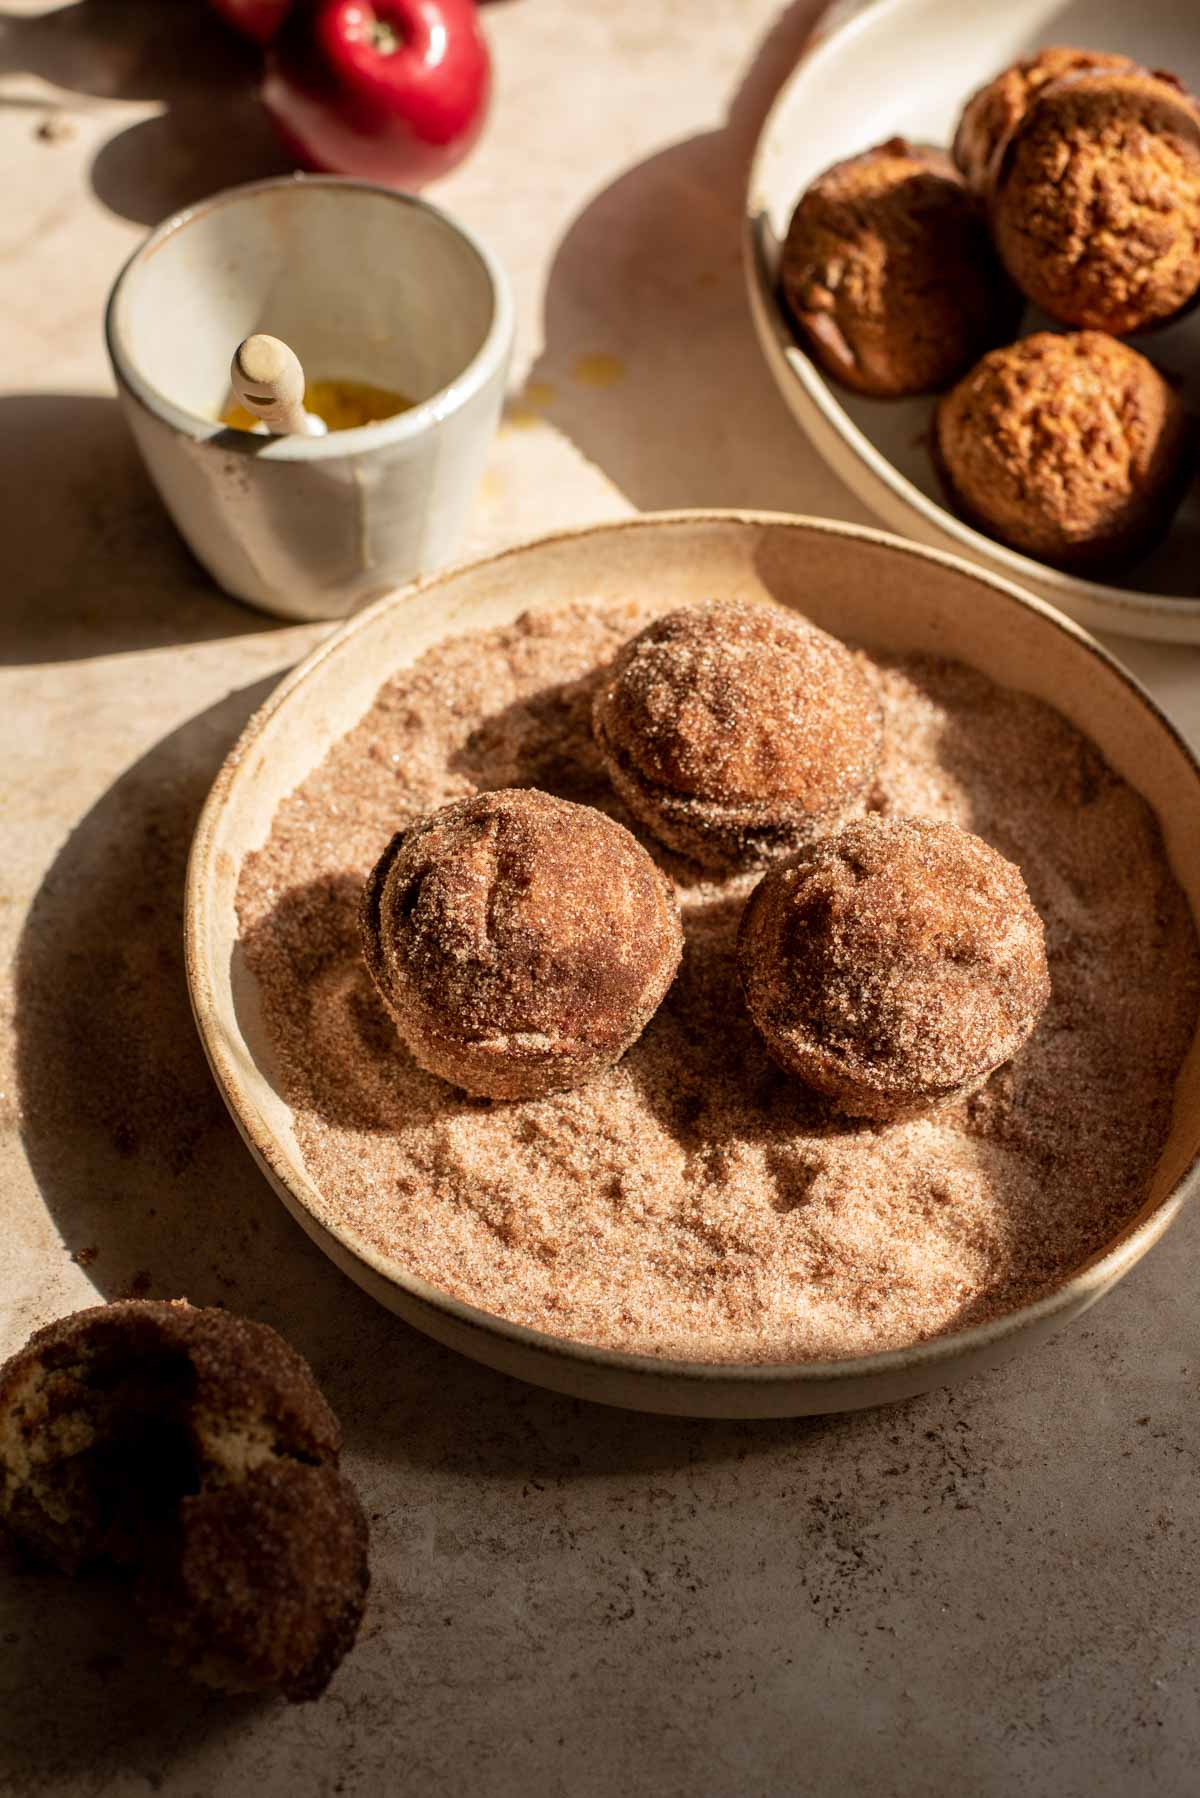 Baked muffins sitting in a bowl with cinnamon sugar.